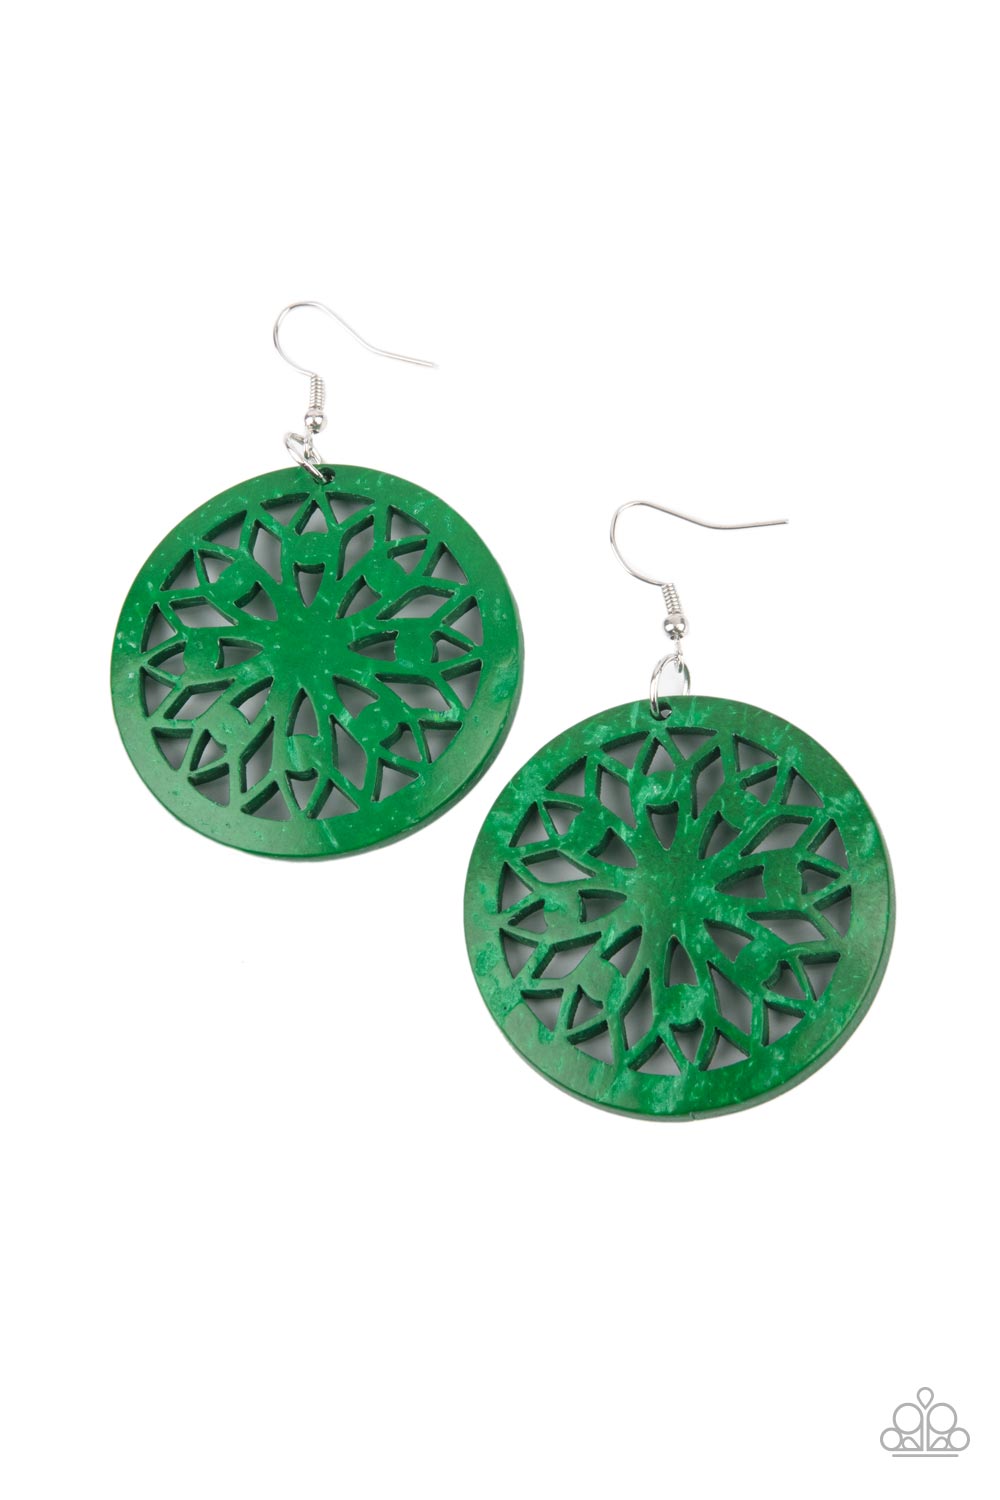 Paparazzi - Ocean Canopy - Green - A bold mandala-inspired design is carved out of an oversized green disc creating an eye-catching statement.